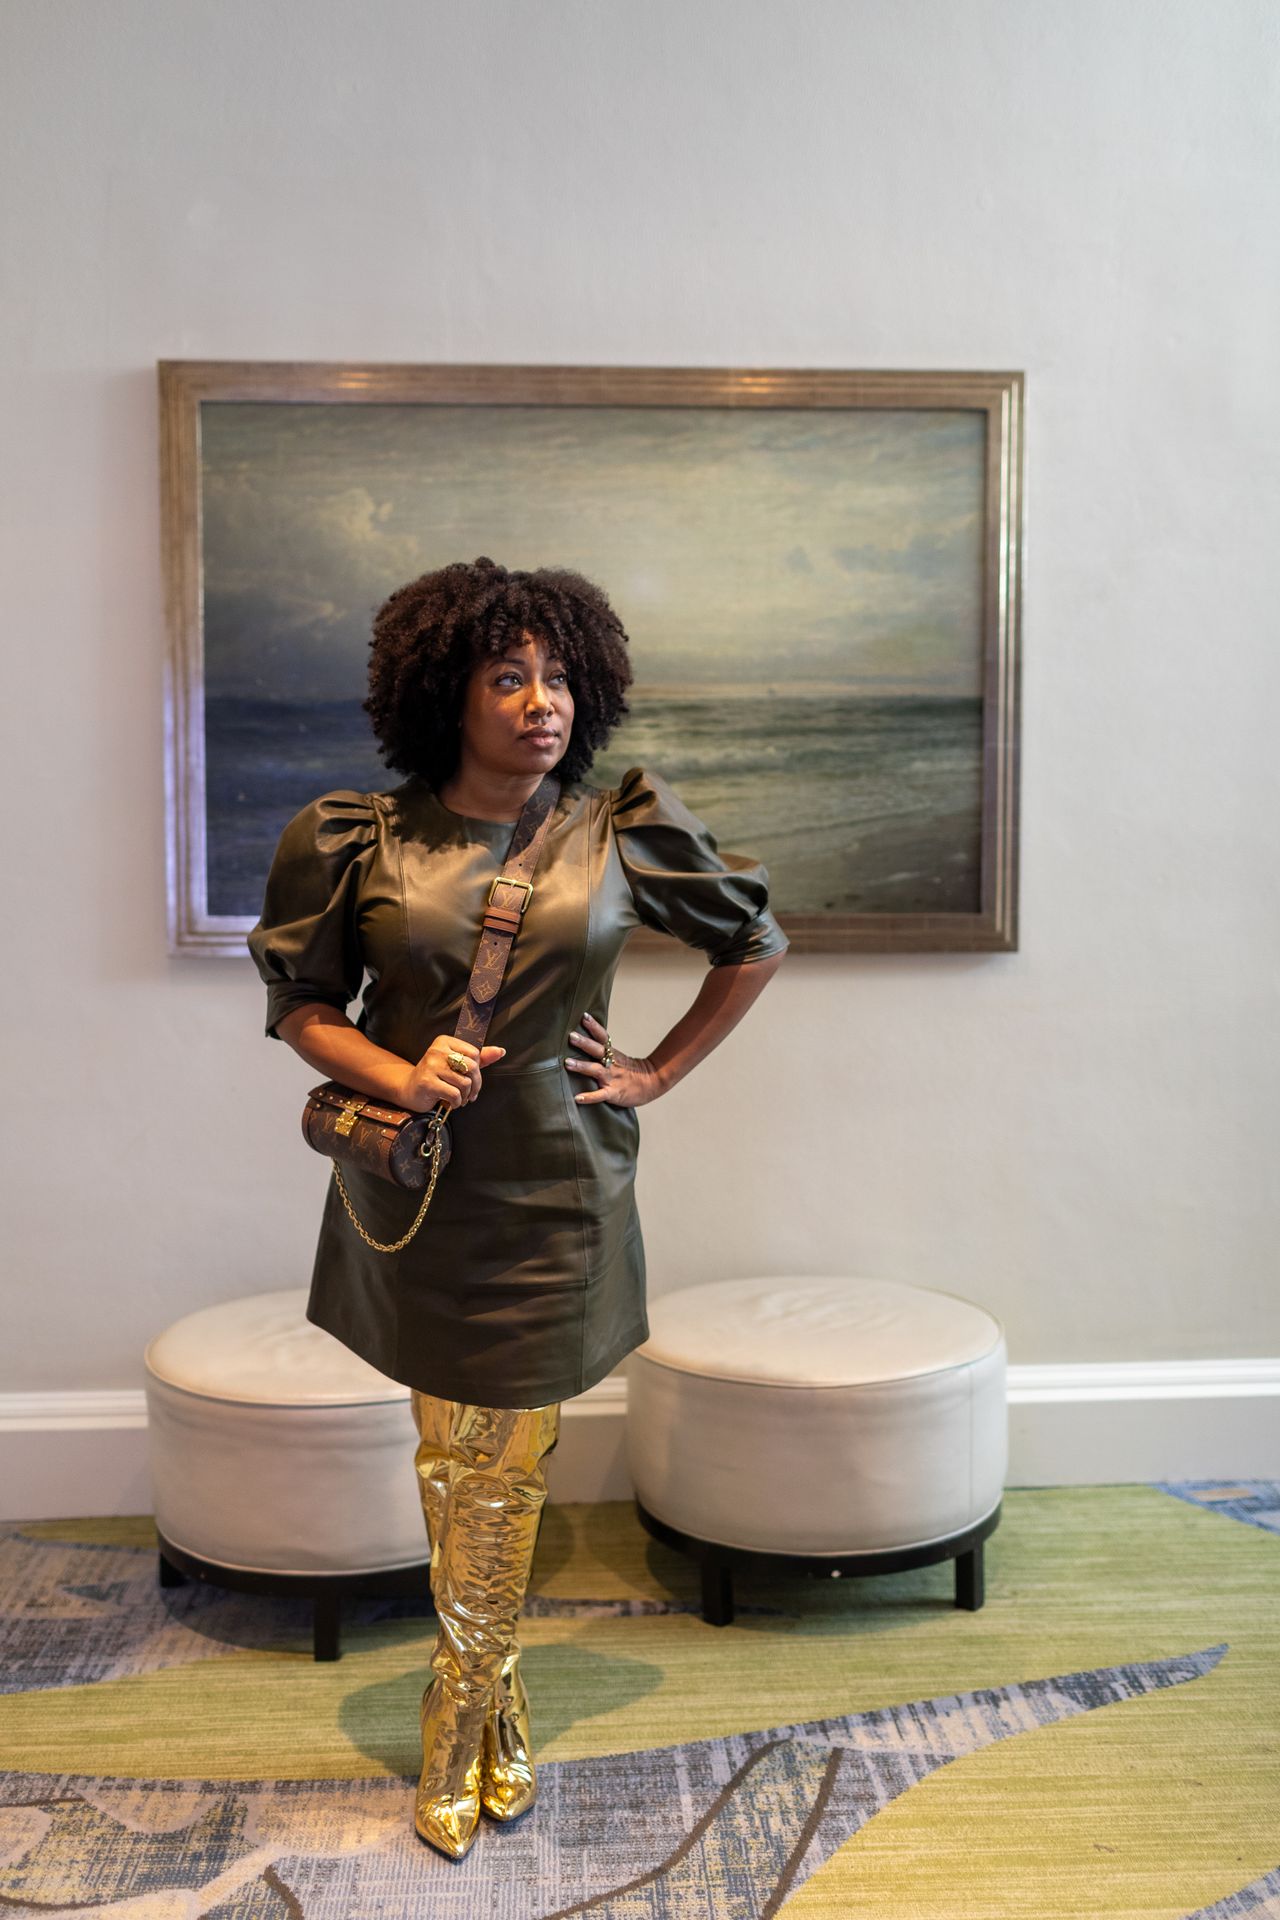 Demetria Lucas, an author and podcast host based in D.C., said of her outfit: “I was trying to convey fashion diplomacy. I love to walk in a room and have people turn their heads and look. It’s a conversation starter, a great opening way to meet people.”